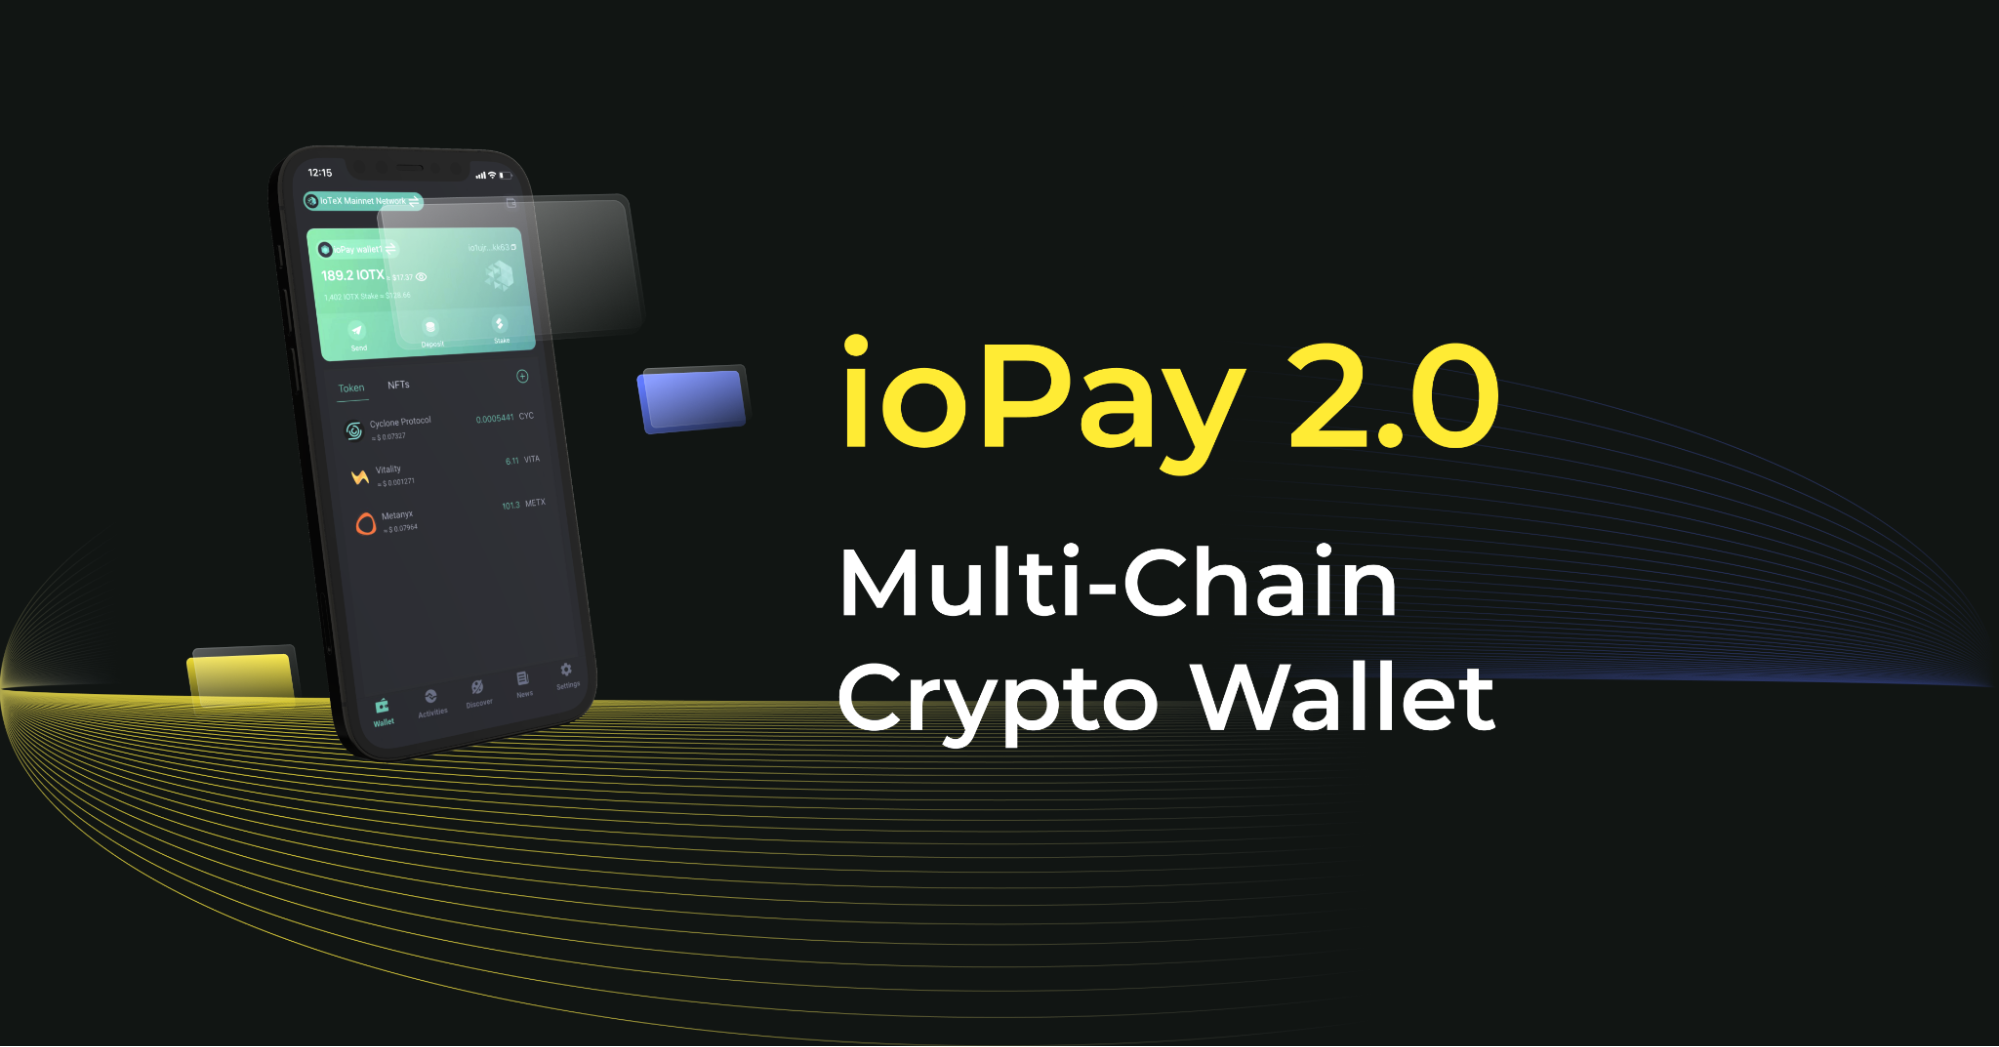 ioPay 2.0 All-in-One User Guide